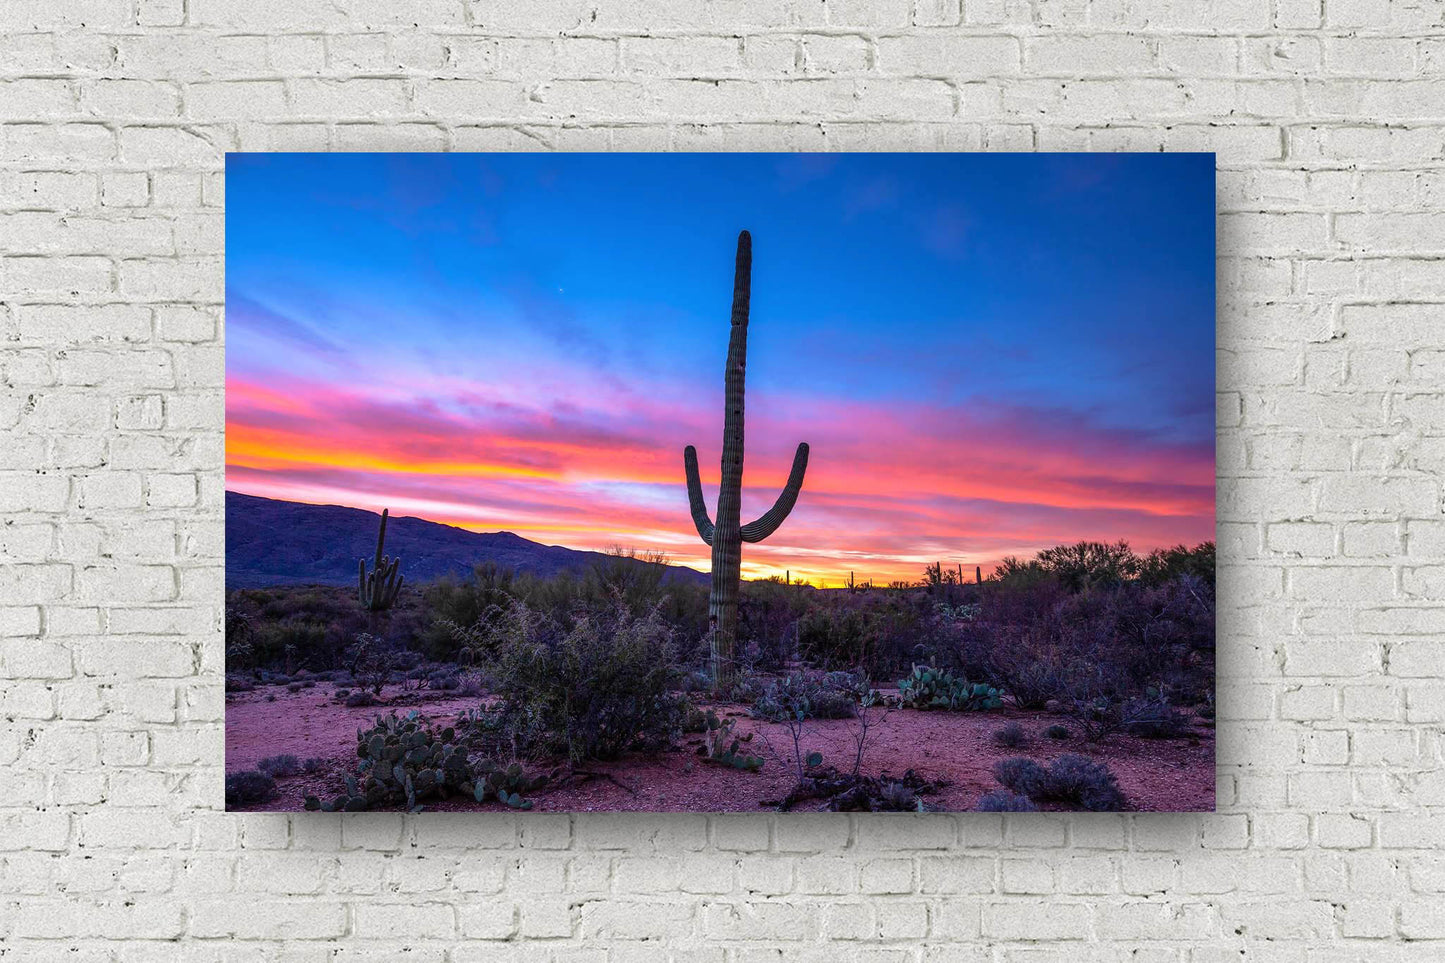 Western landscape metal print of a saguaro cactus standing tall during a colorful sunrise in the Sonoran Desert near Tucson, Arizona by Sean Ramsey of Southern Plains Photography.